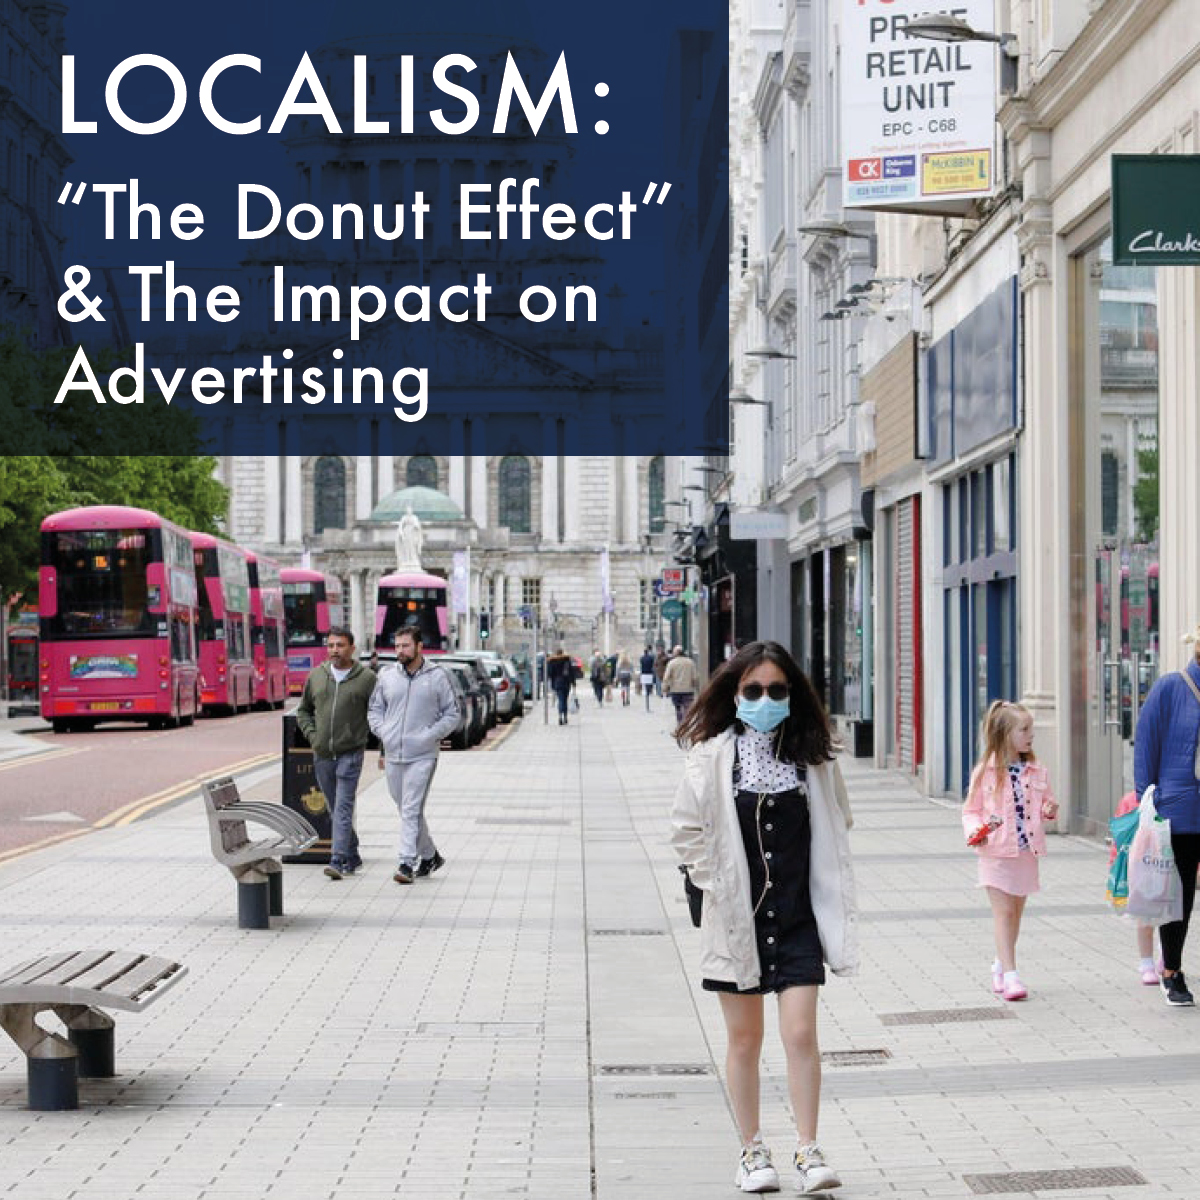 Localism, “the donut effect” and the impact on advertising